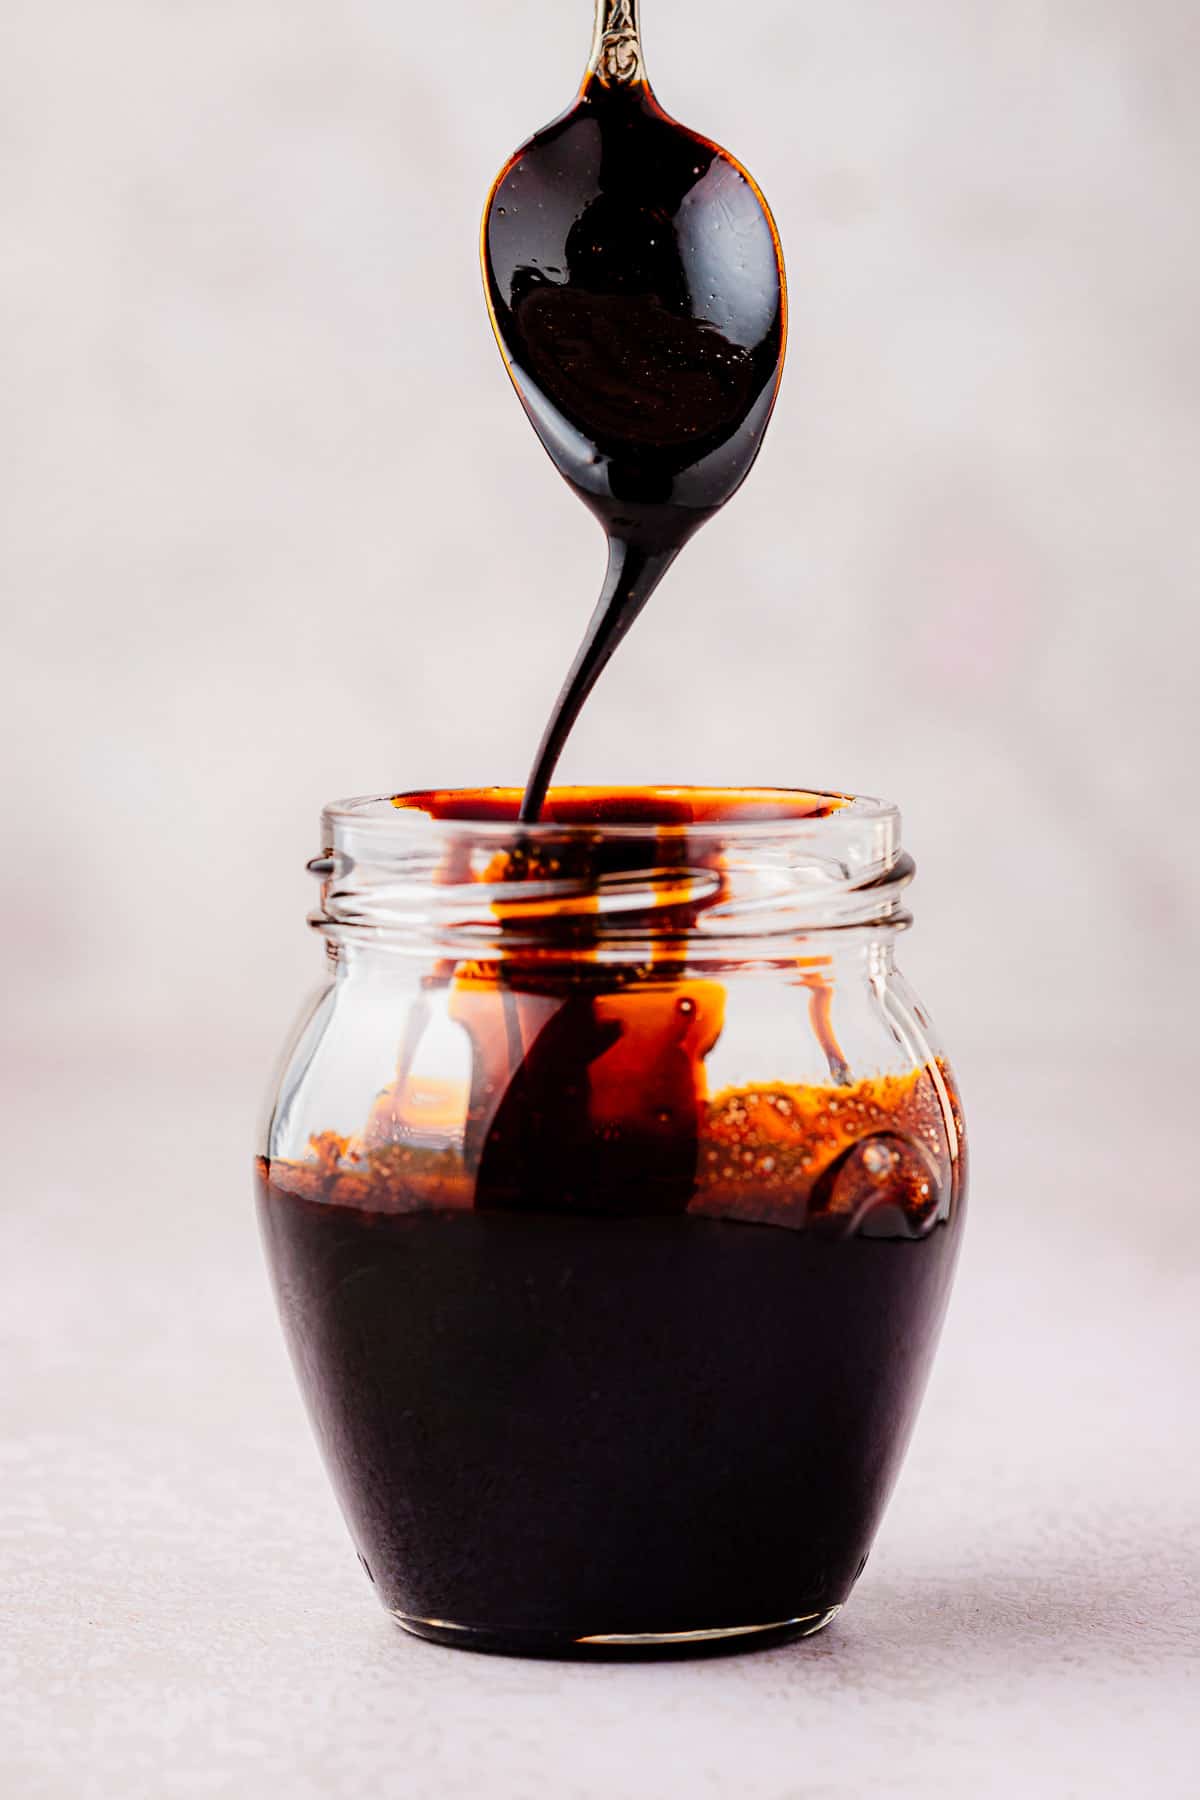 balsamic glaze being drizzled from a spoon into a jar.